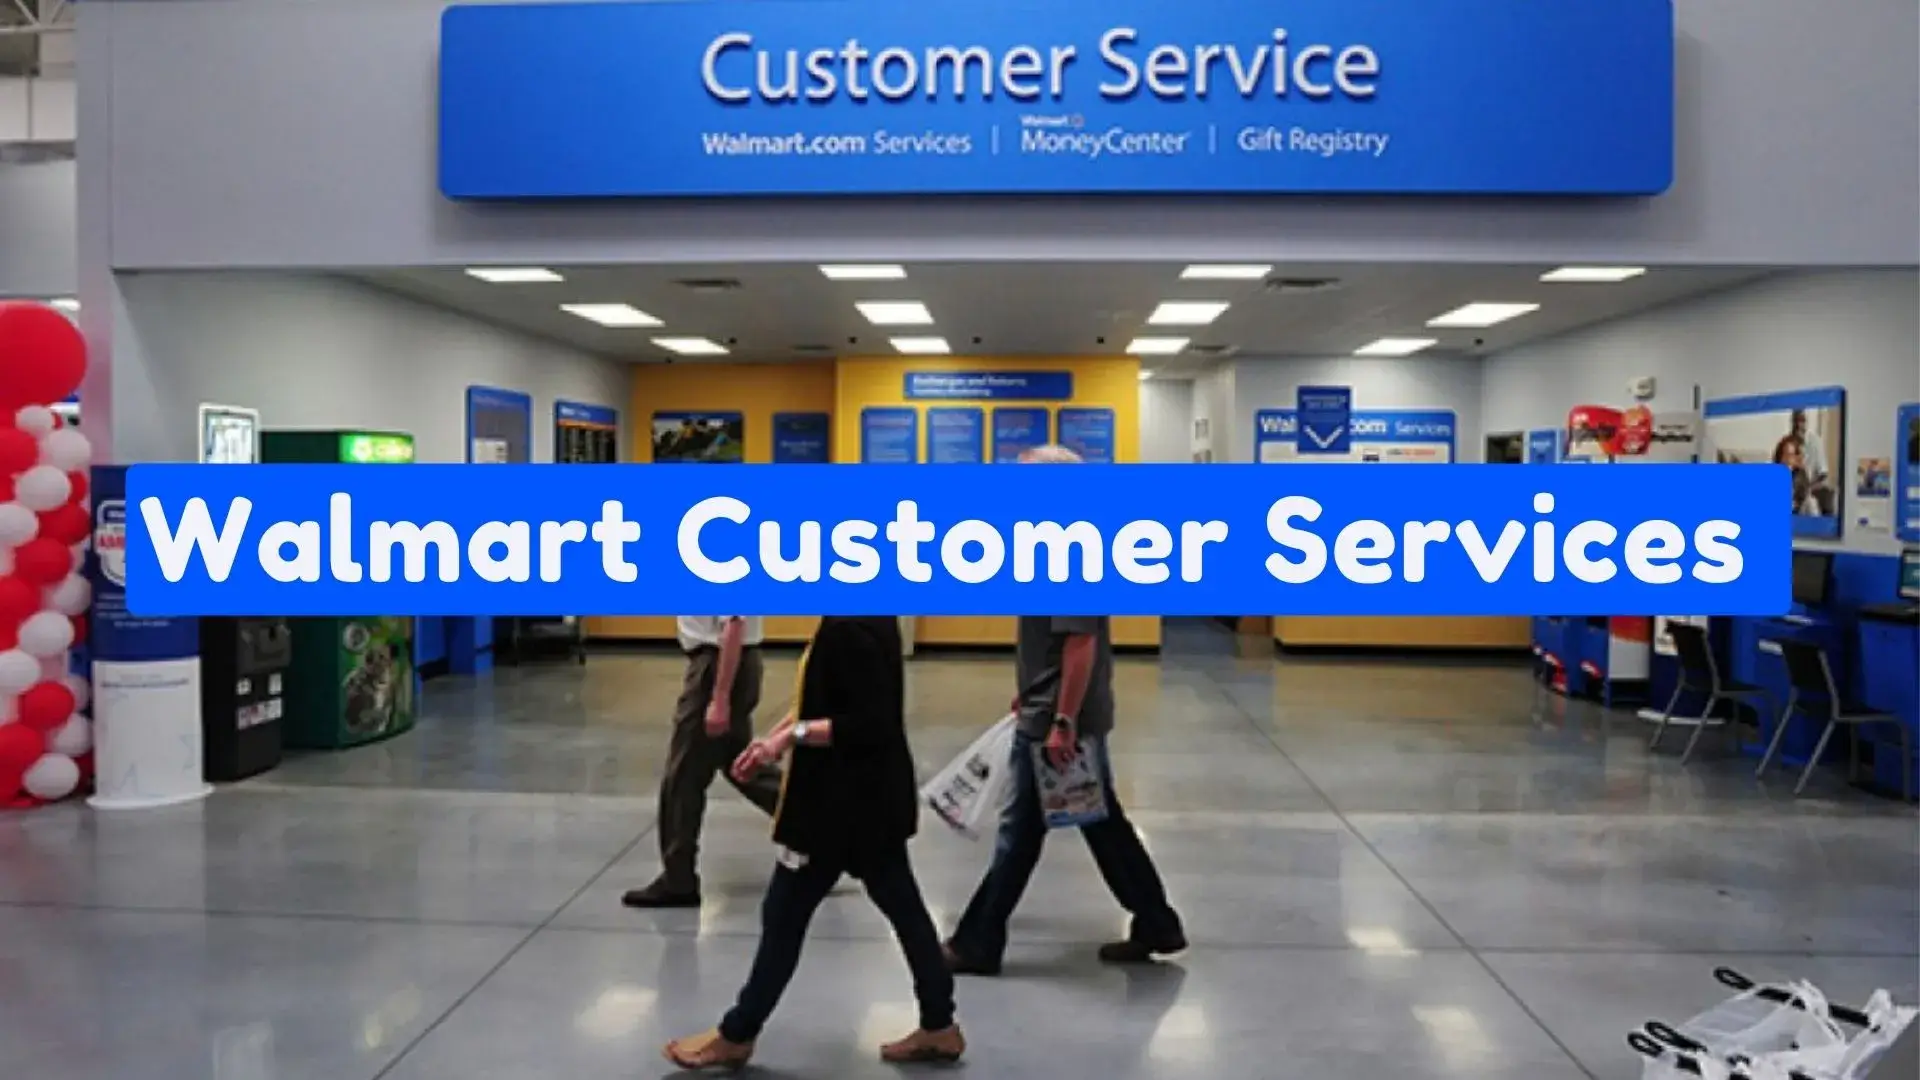 Are You Finding Walmart Customer Service Desk Hours | Then Read This Ultimate Guide To Find Walmart Customer Service Hours And Walmart Return Hours Near You!